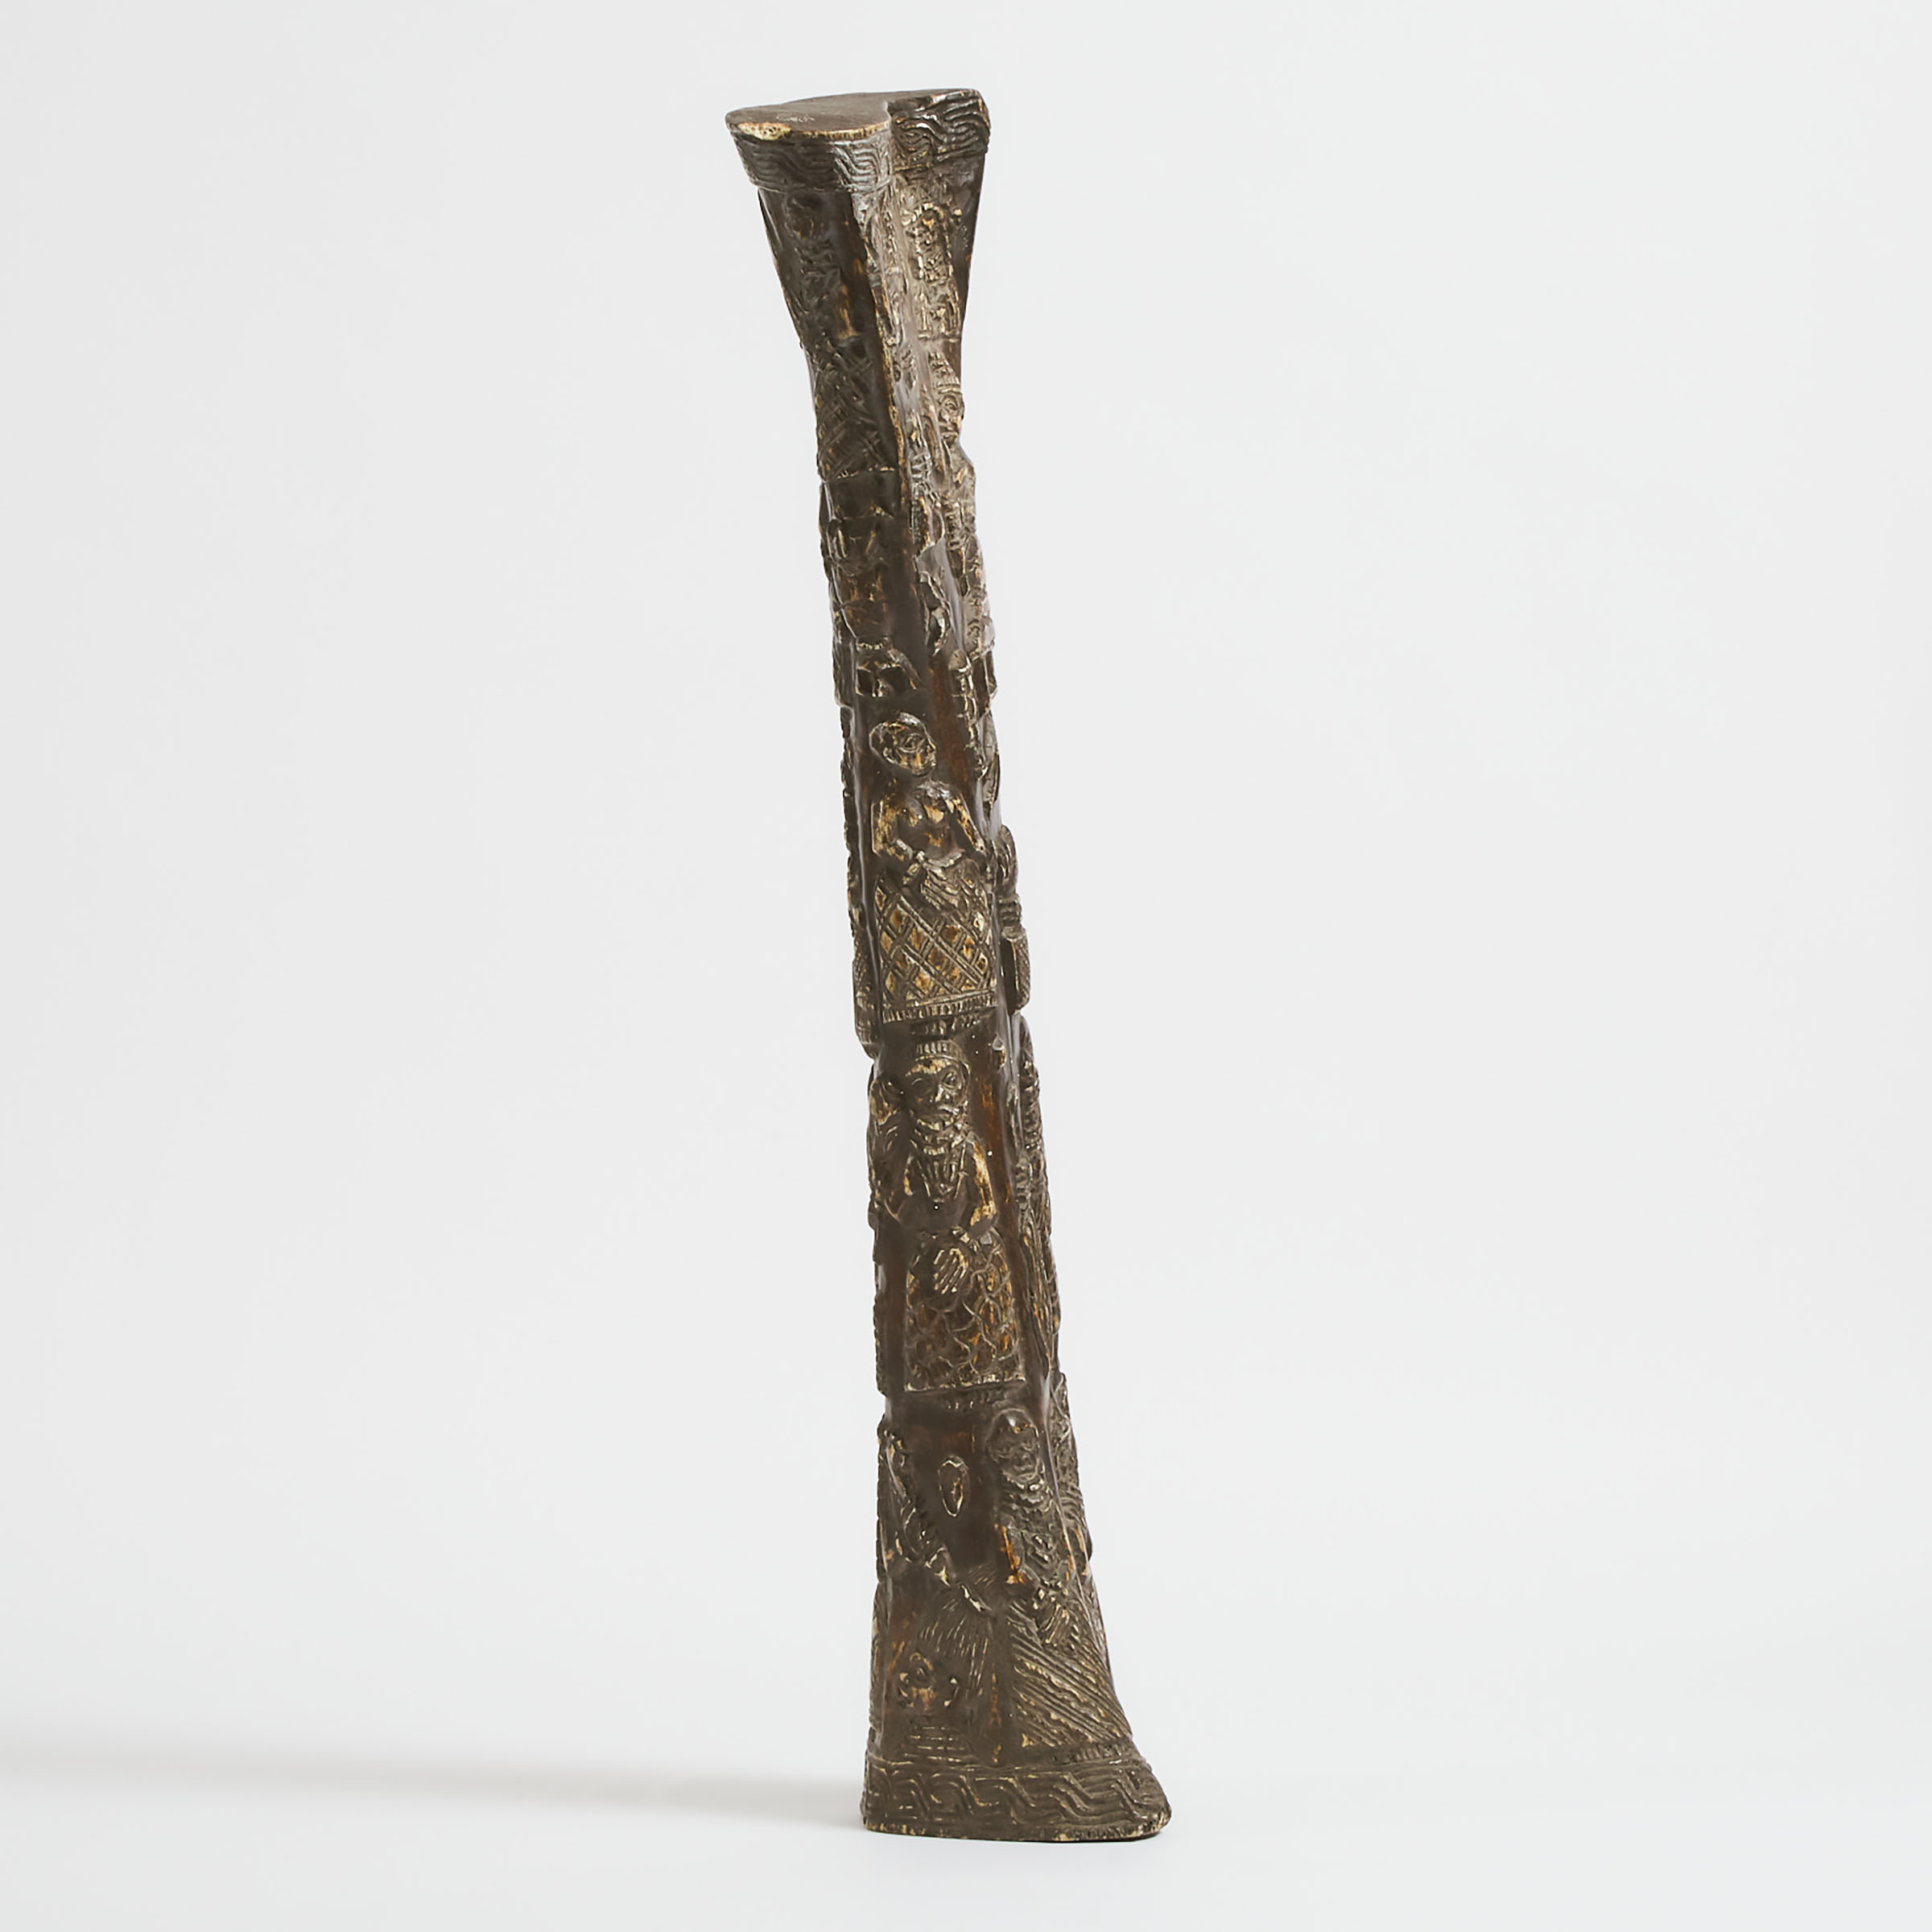 Benin Relief Carved Elephant Femur, Nigeria, West Africa, early to mid 20th century